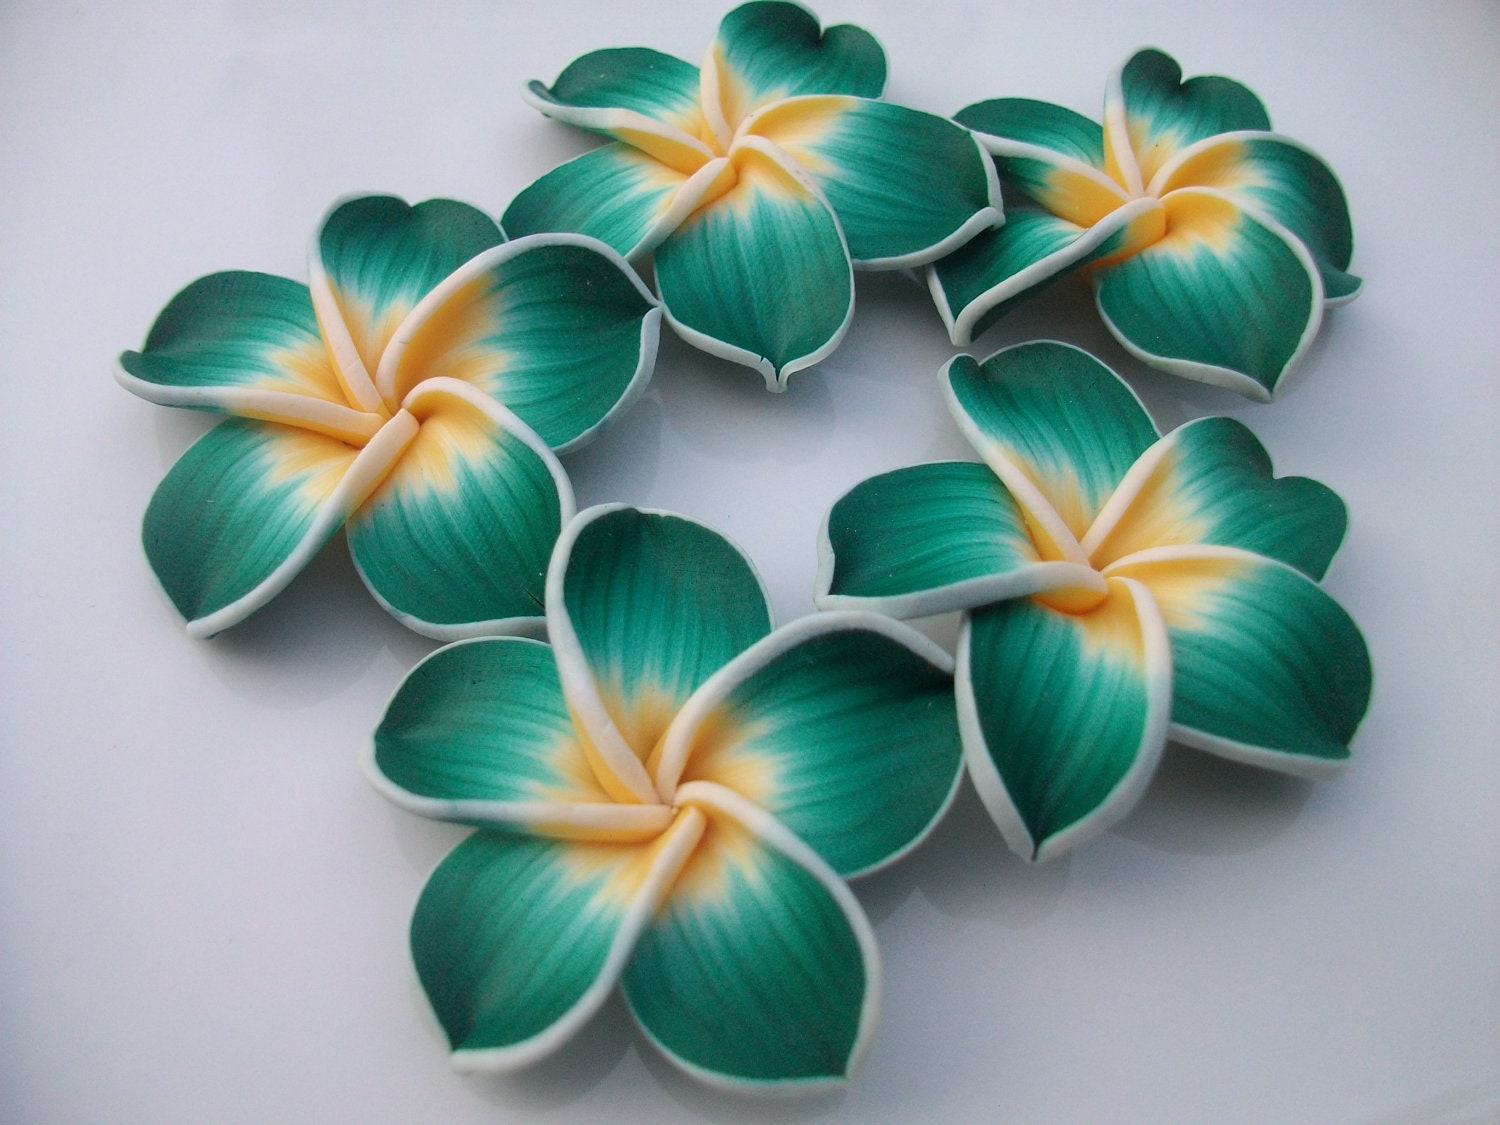 Emerald Green and Yellow / White Fimo by ChromaticitySupply